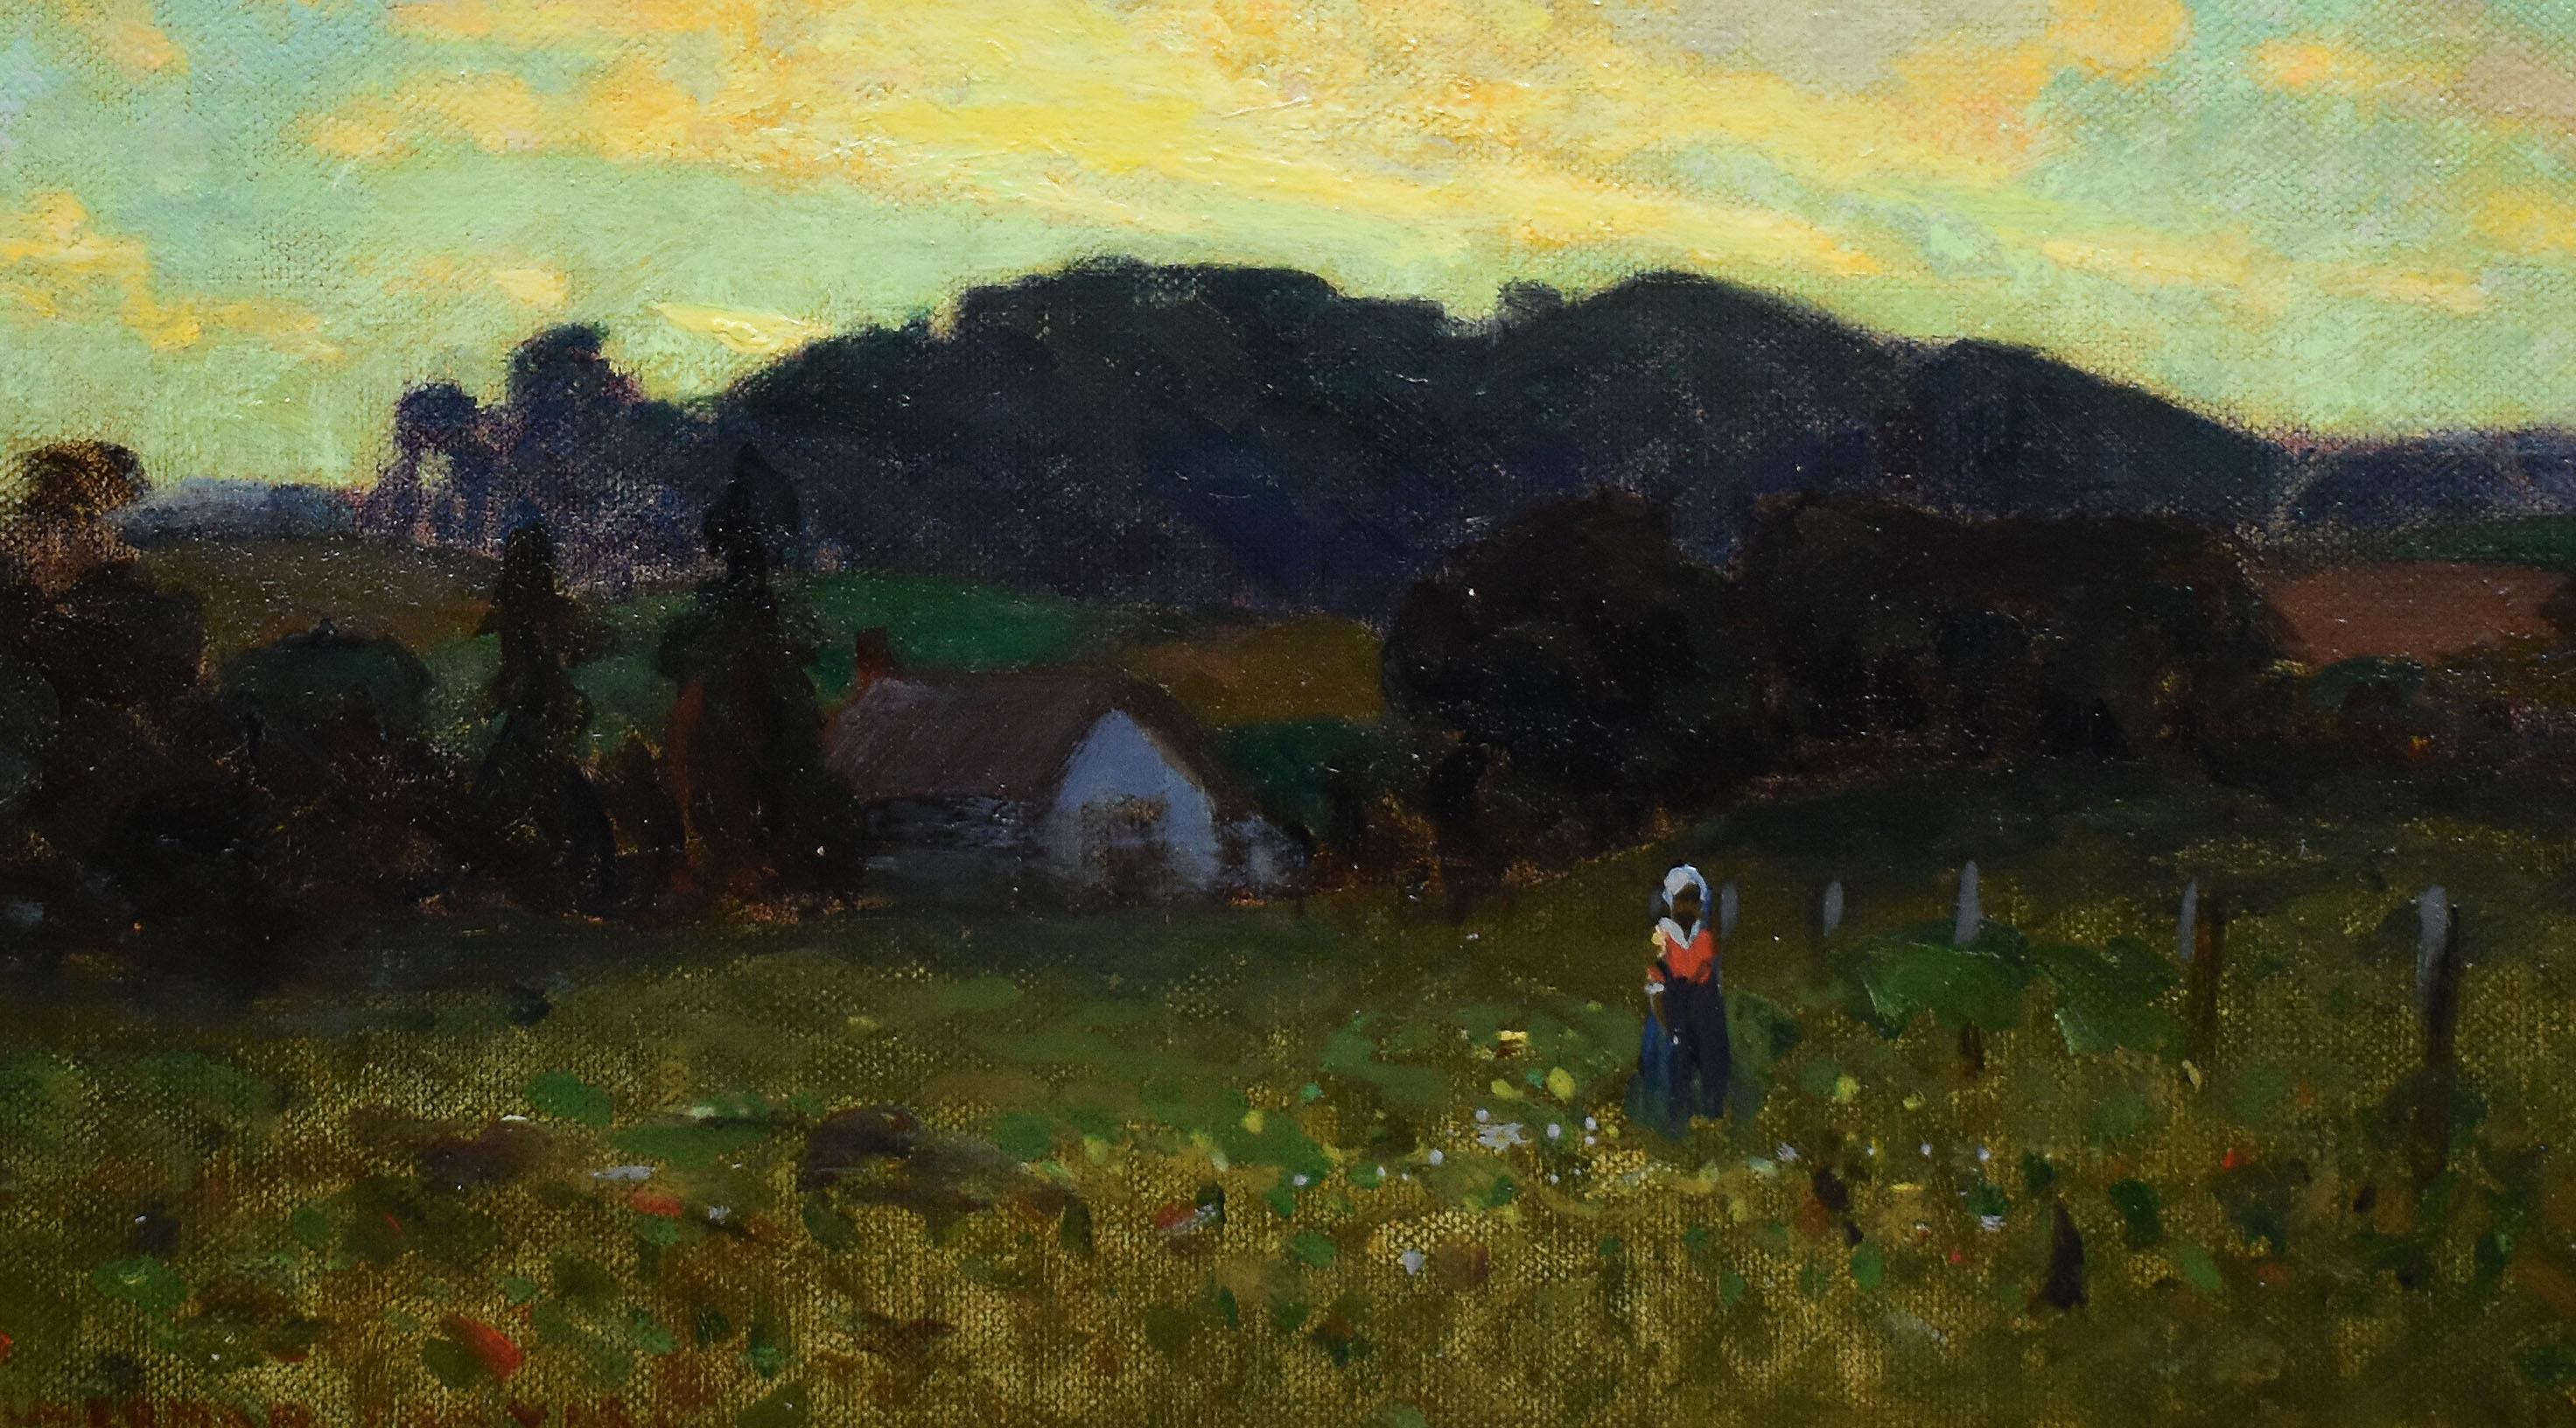 Texas Sunset Farm with Figure Working, Landscape Oil Painting by Olin Travis 1